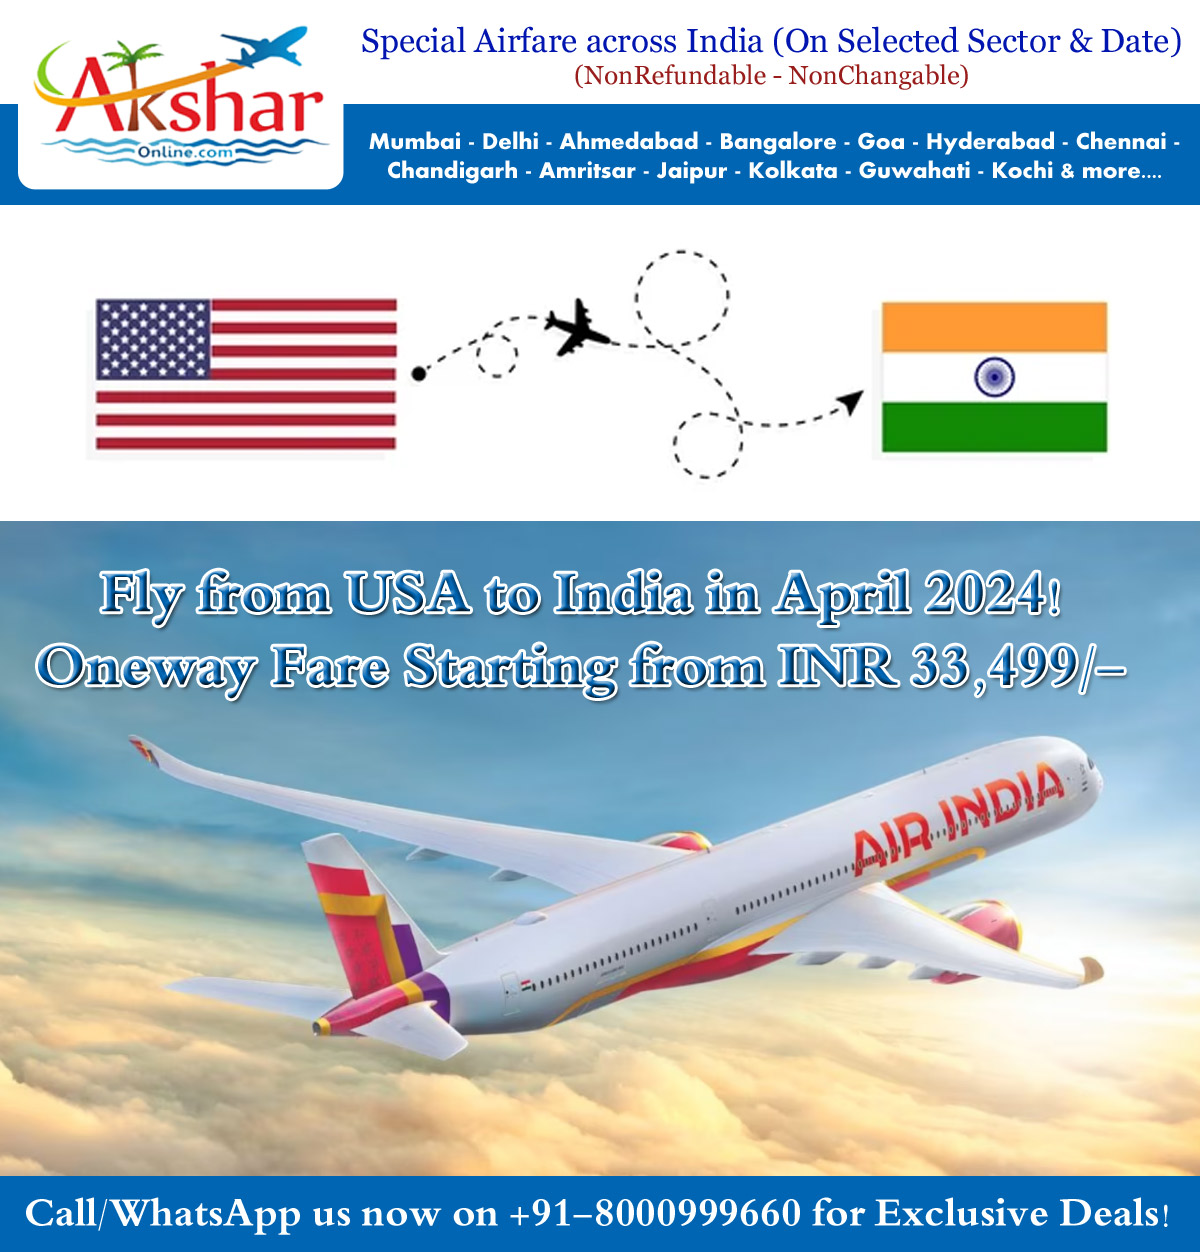 🌟✈️ Exciting News! Fly from USA to India in April 2024 with fares starting from just INR 33,599/- (Oneway Fare)! 🌟✈️ Looking for the best rates on domestic and international air ticket bookings? Look no further! Contact Mitesh Patel at +91-8000999660 and unlock unbeatable deals for your travel needs. Whether it's a trip within India or an international adventure, we've got you covered! Don't miss out on this incredible opportunity. Book now and make your travel dreams a reality! #FlyToIndia #TravelDeals #BestRates #AirTicketBooking #April2024 #TravelWithEase #aksharonline #TravelDeals #usatoindia #indiaairfare #americatoindiaairfare #americaflight #usaflightfare #usaairfare #CanadaAirfare #usafly #indiafly #mumbaifly #CanadaFlight #CanadaFly #aksharonline #FlighttoCanada #Winipeg #toronto #CheapFlightsToIndia2024 #CanadaToIndiaFlightDeals #BudgetTravelIndia #FlyAffordableToIndia #AprilMayFlightSpecials #DiscountedTicketsToIndia #FlySmartToIndia #affordableairfarecanadaindia #spring2024flightdeals #flyusatoindiabudget2024  #flyusatoindia #indiaboundonabudget #cheapflighttoindia2024 #flycanadatoindiabudget2024 #aprilmaytraveldeals #canadatoindiaairfarediscounts #budgettravelindia2024 #CheapTicketsToIndia #Flightdeals